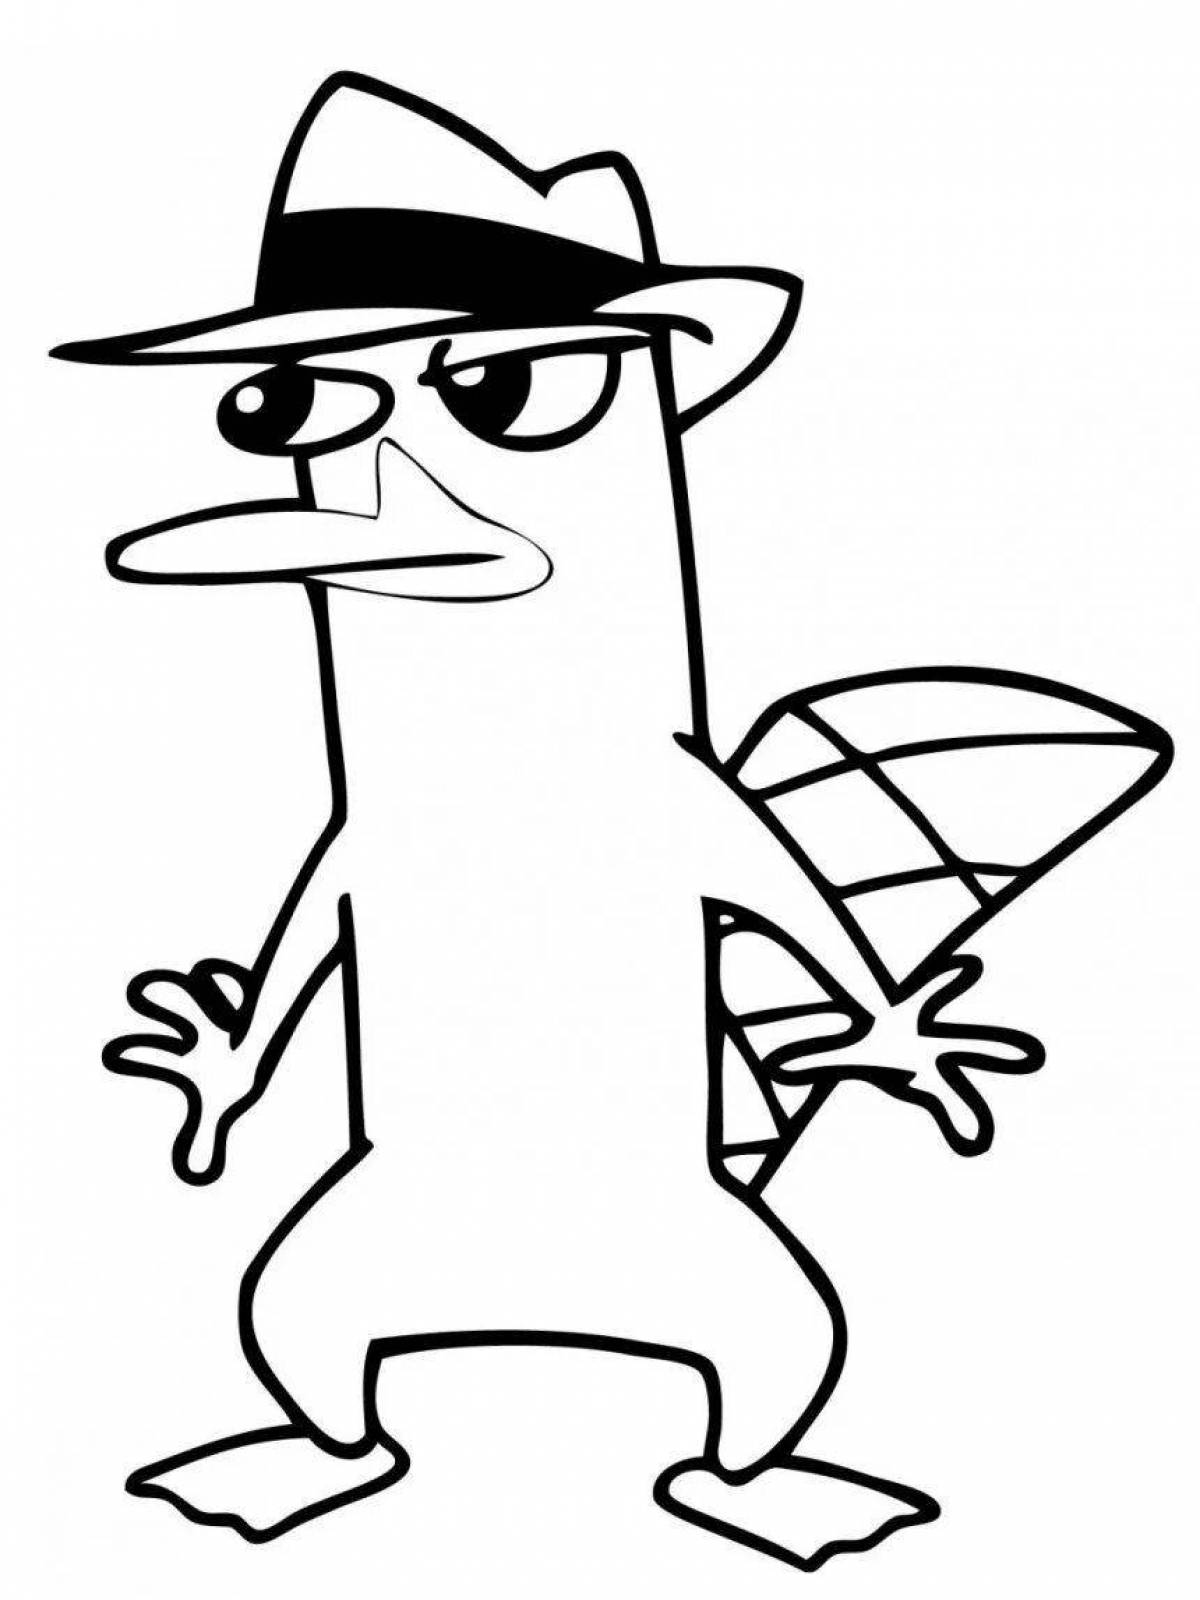 Perry's stunning platypus coloring page